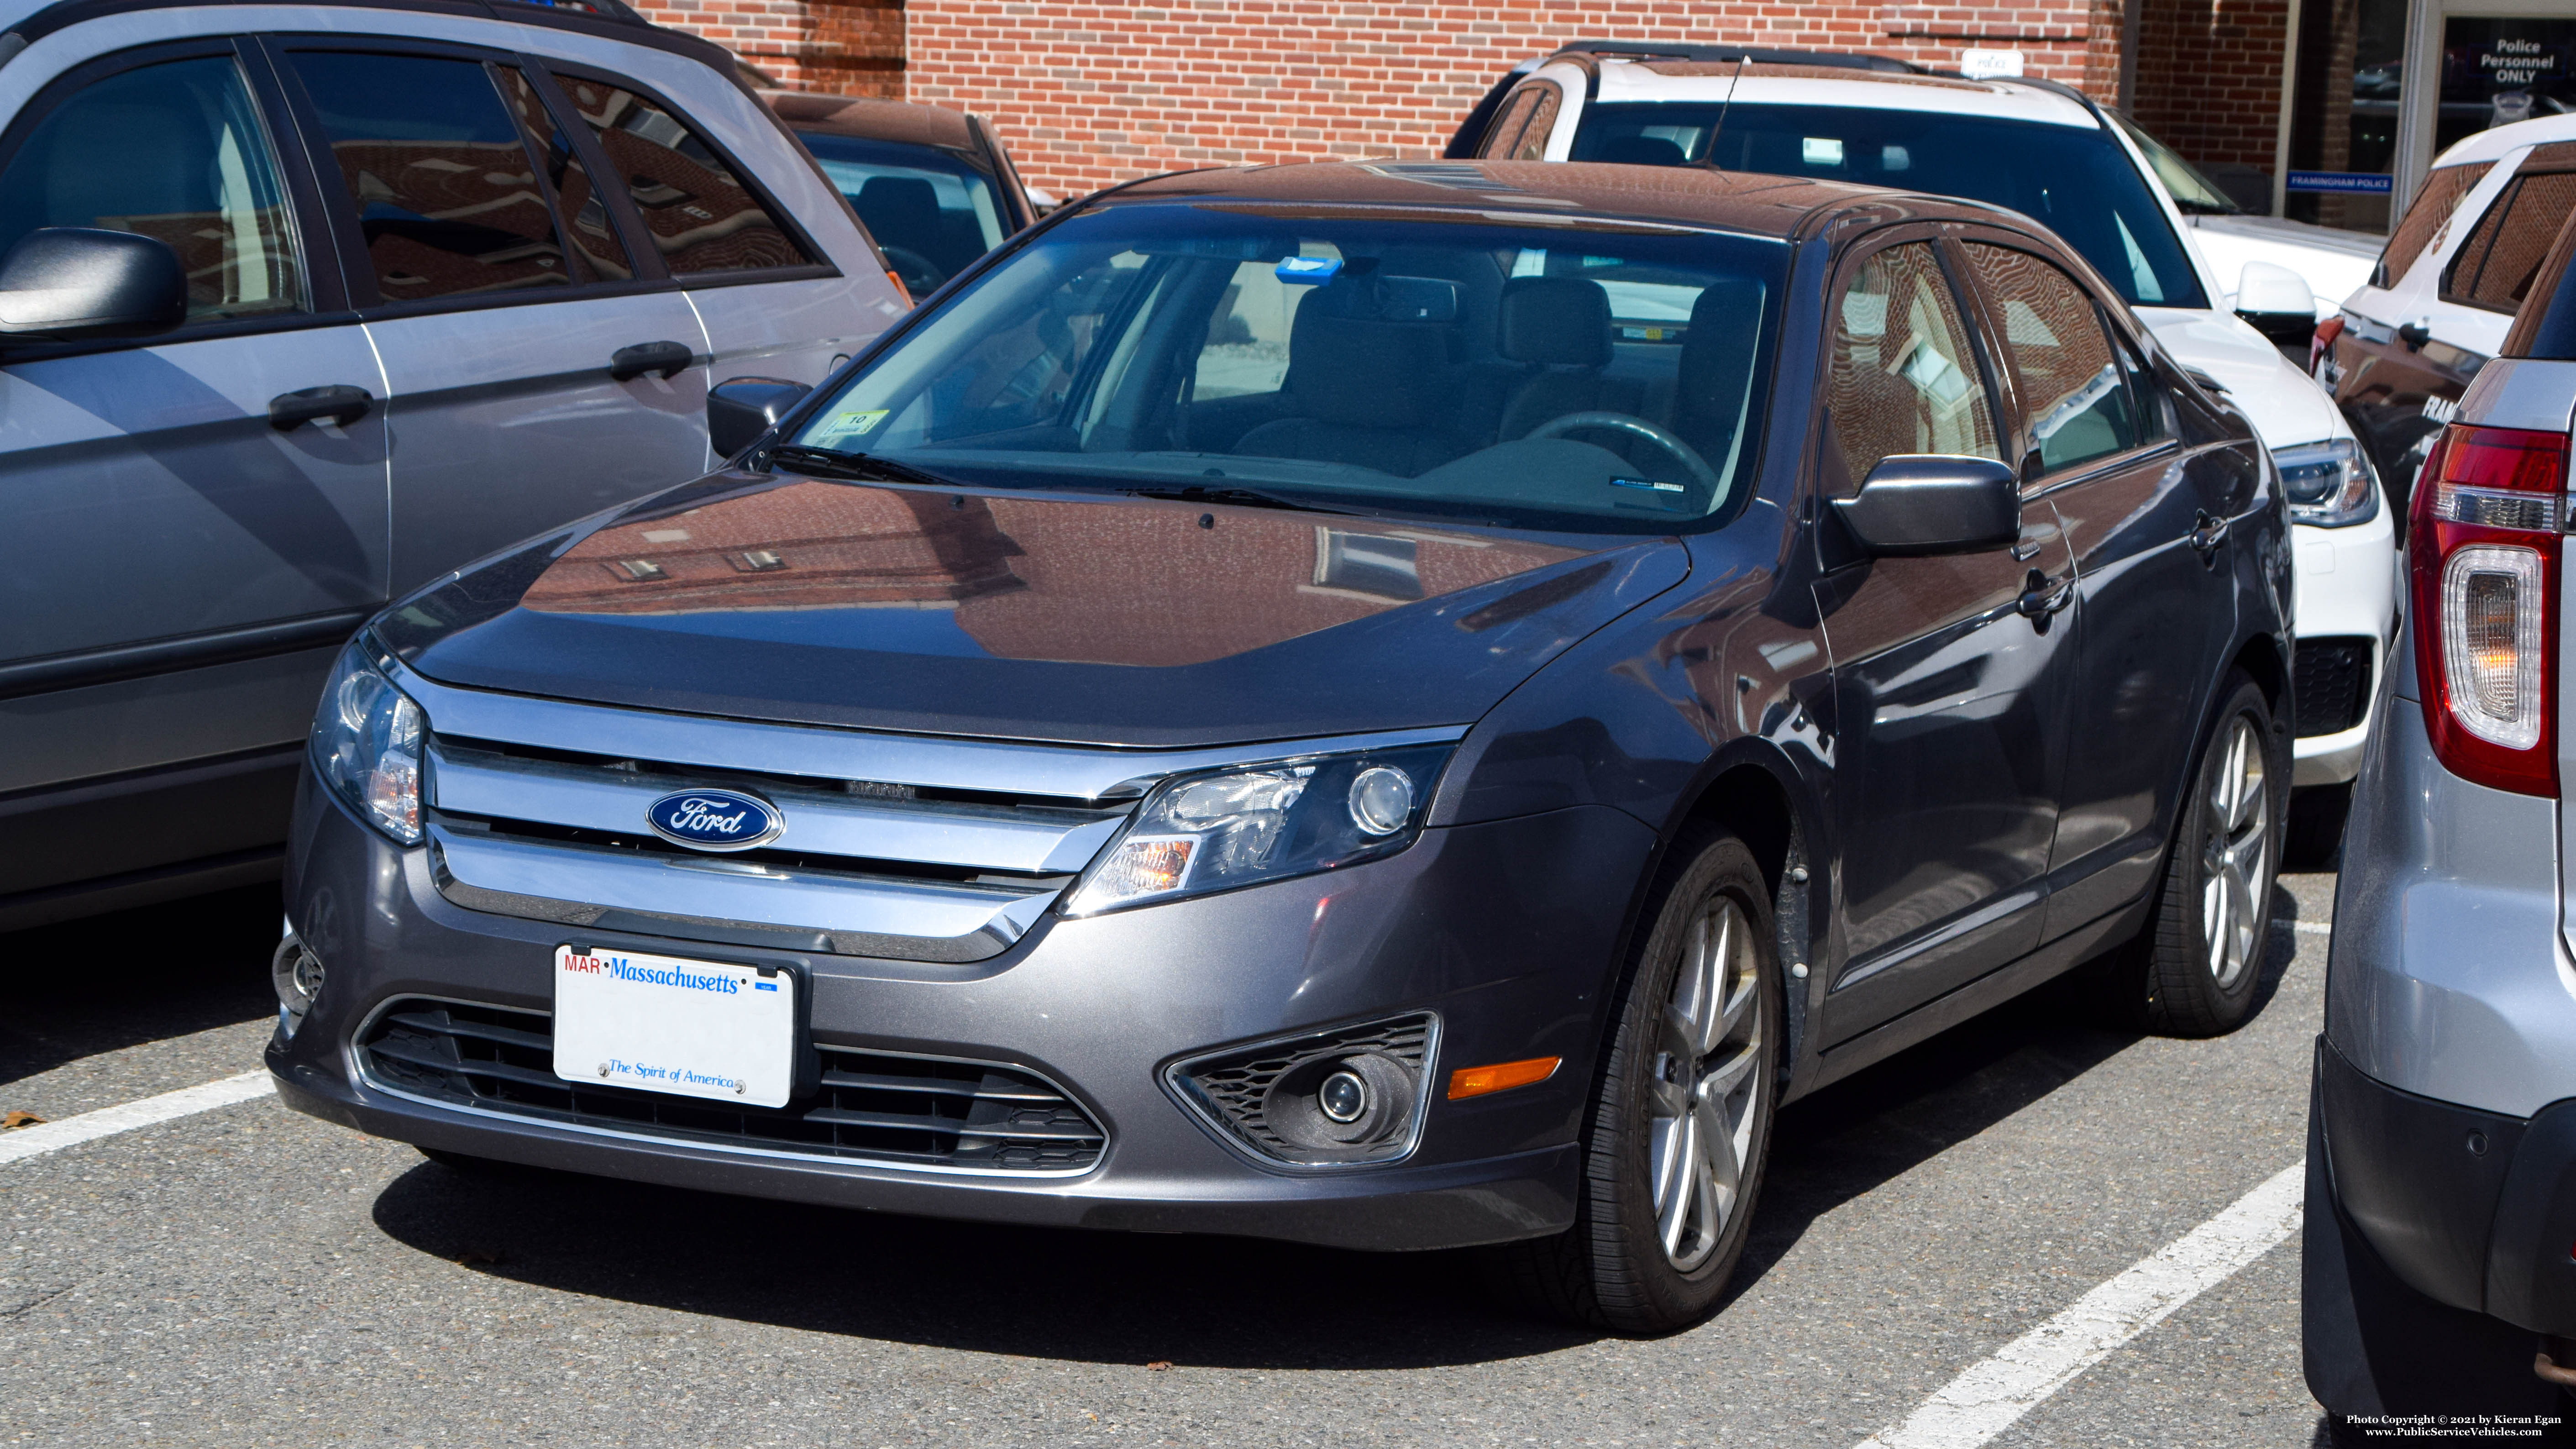 A photo  of Framingham Police
            Unmarked Unit, a 2010-2012 Ford Fusion             taken by Kieran Egan